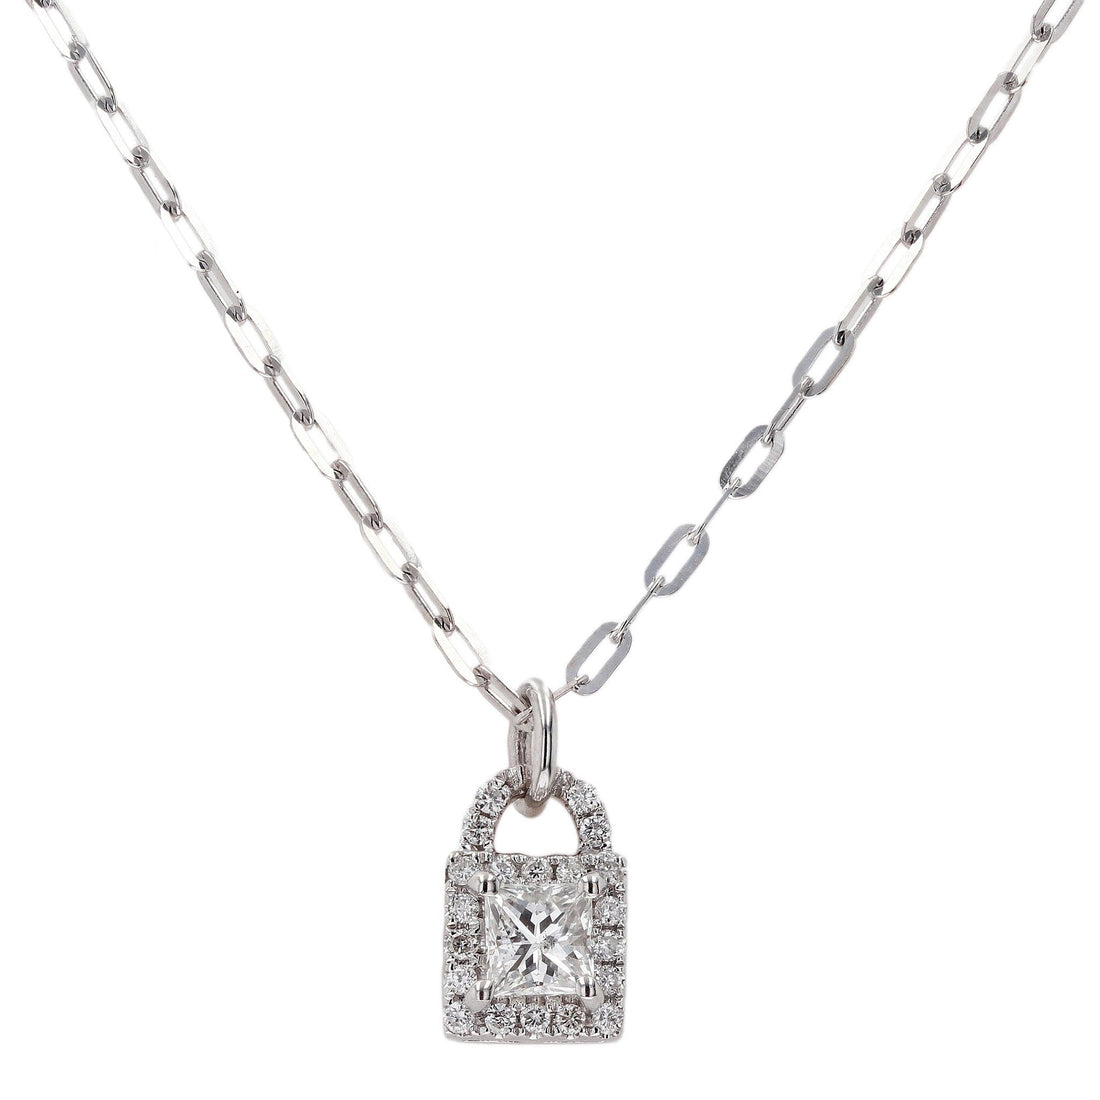 Princess Cut Diamond Lock Pendant by Skeie's Jewelers, 16 Cable Chain and Pendant